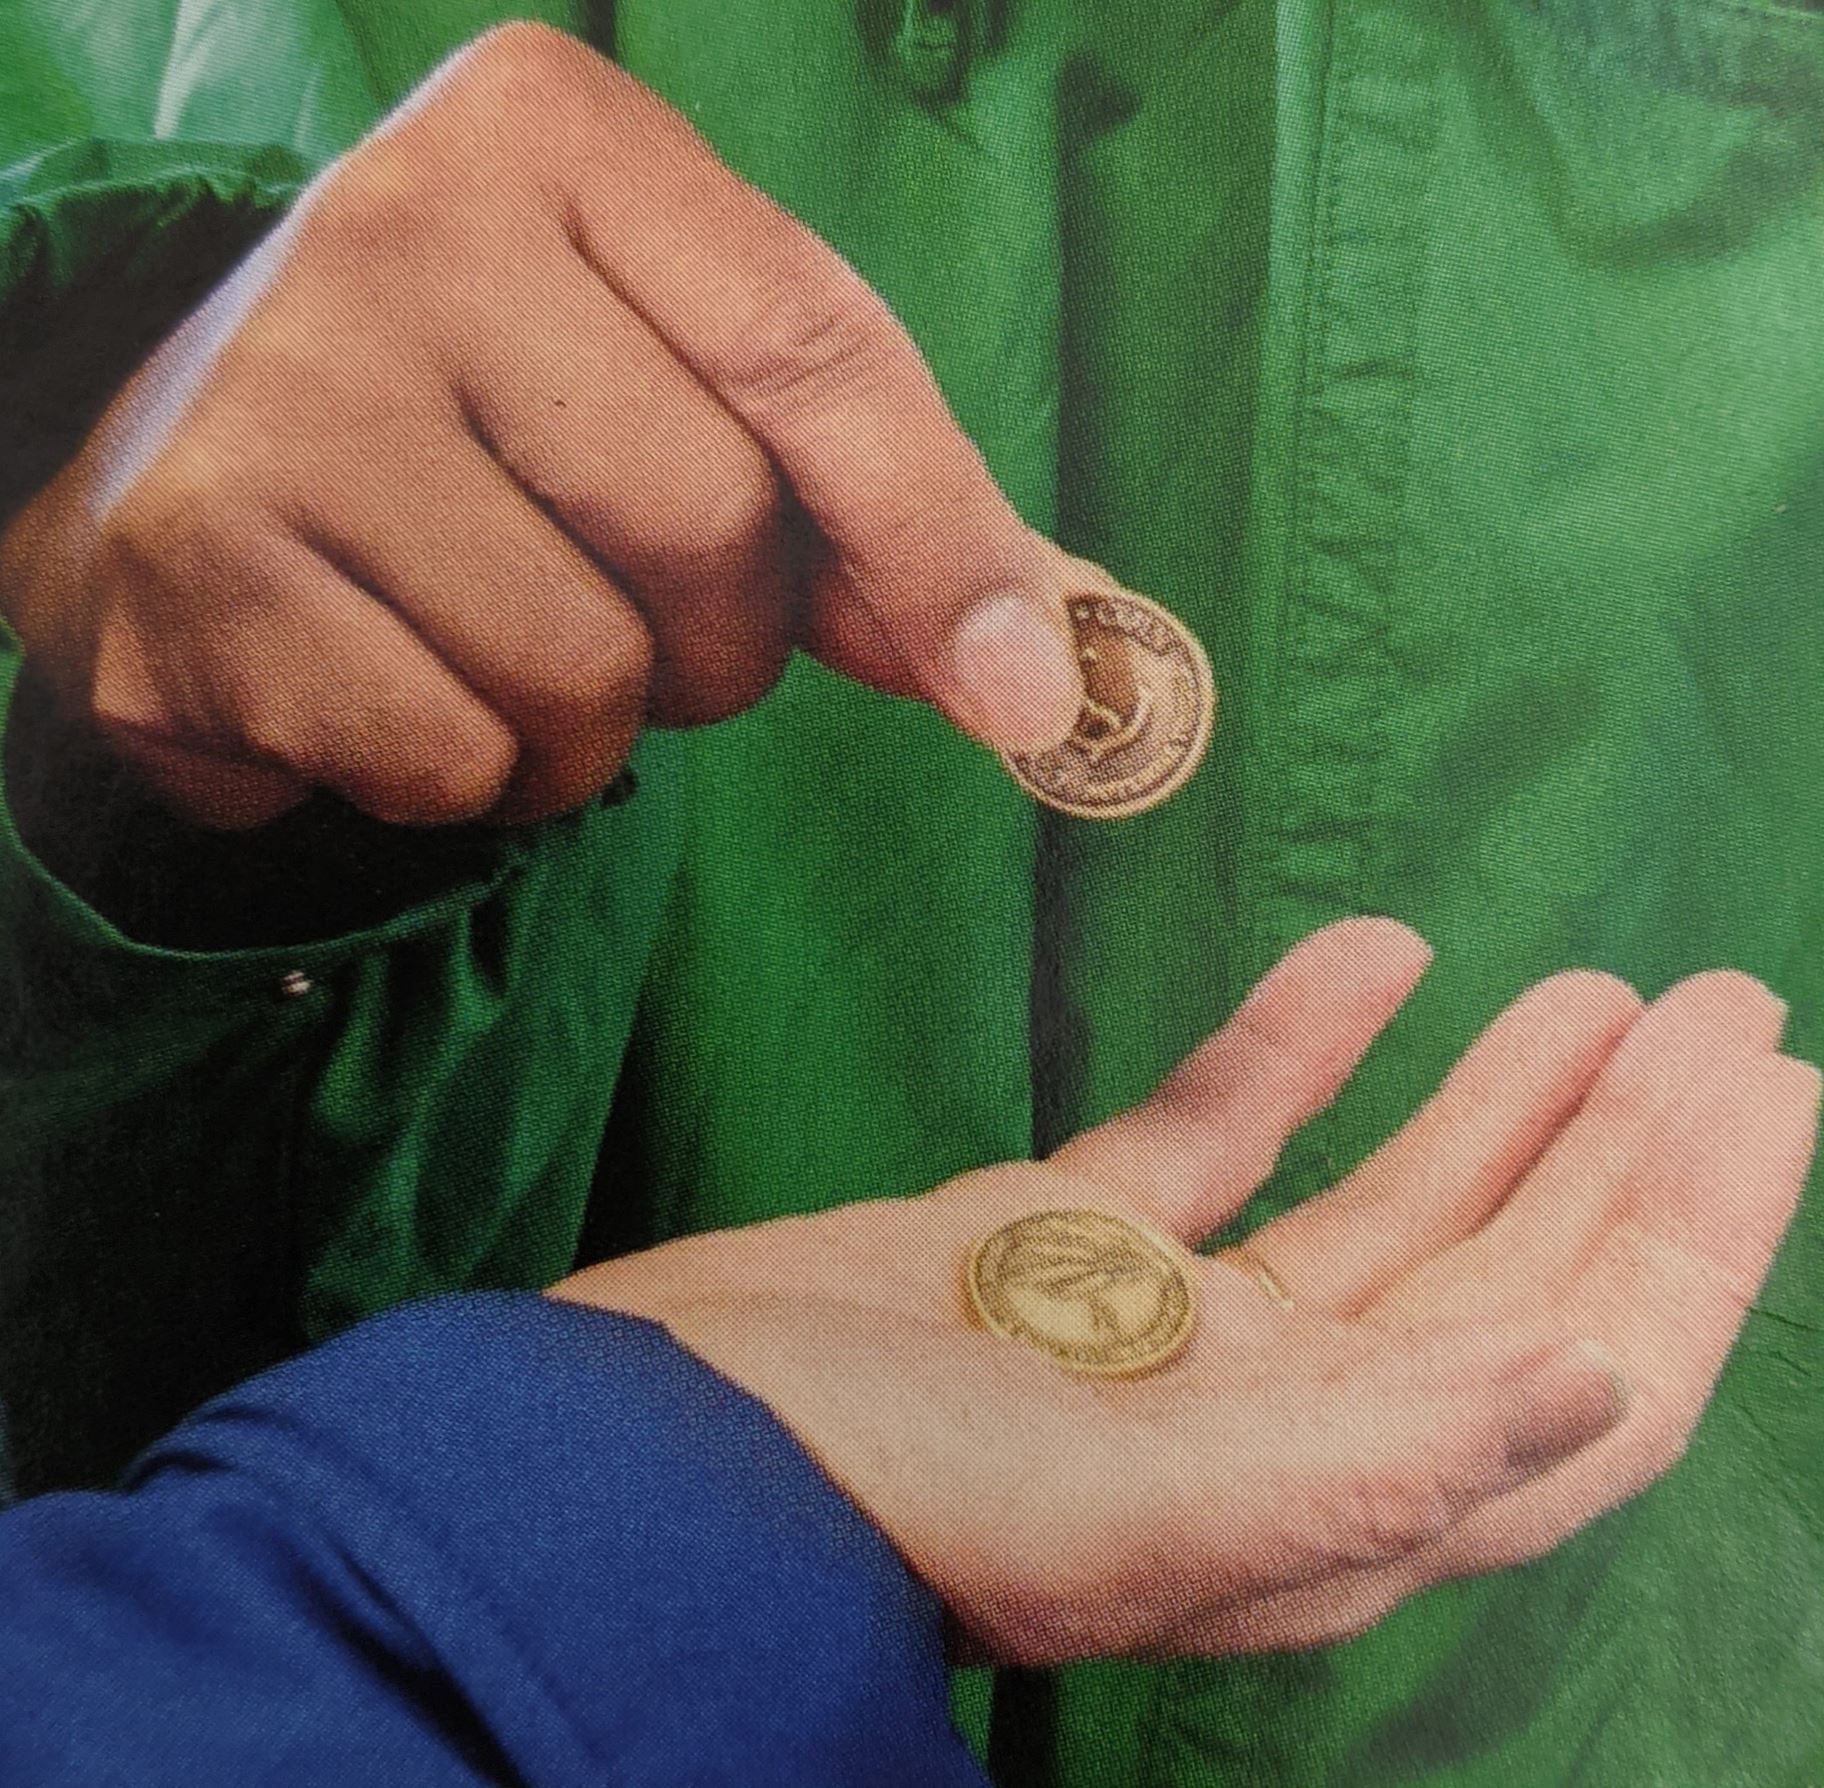 Photo of a person handing another person Breadcoins.